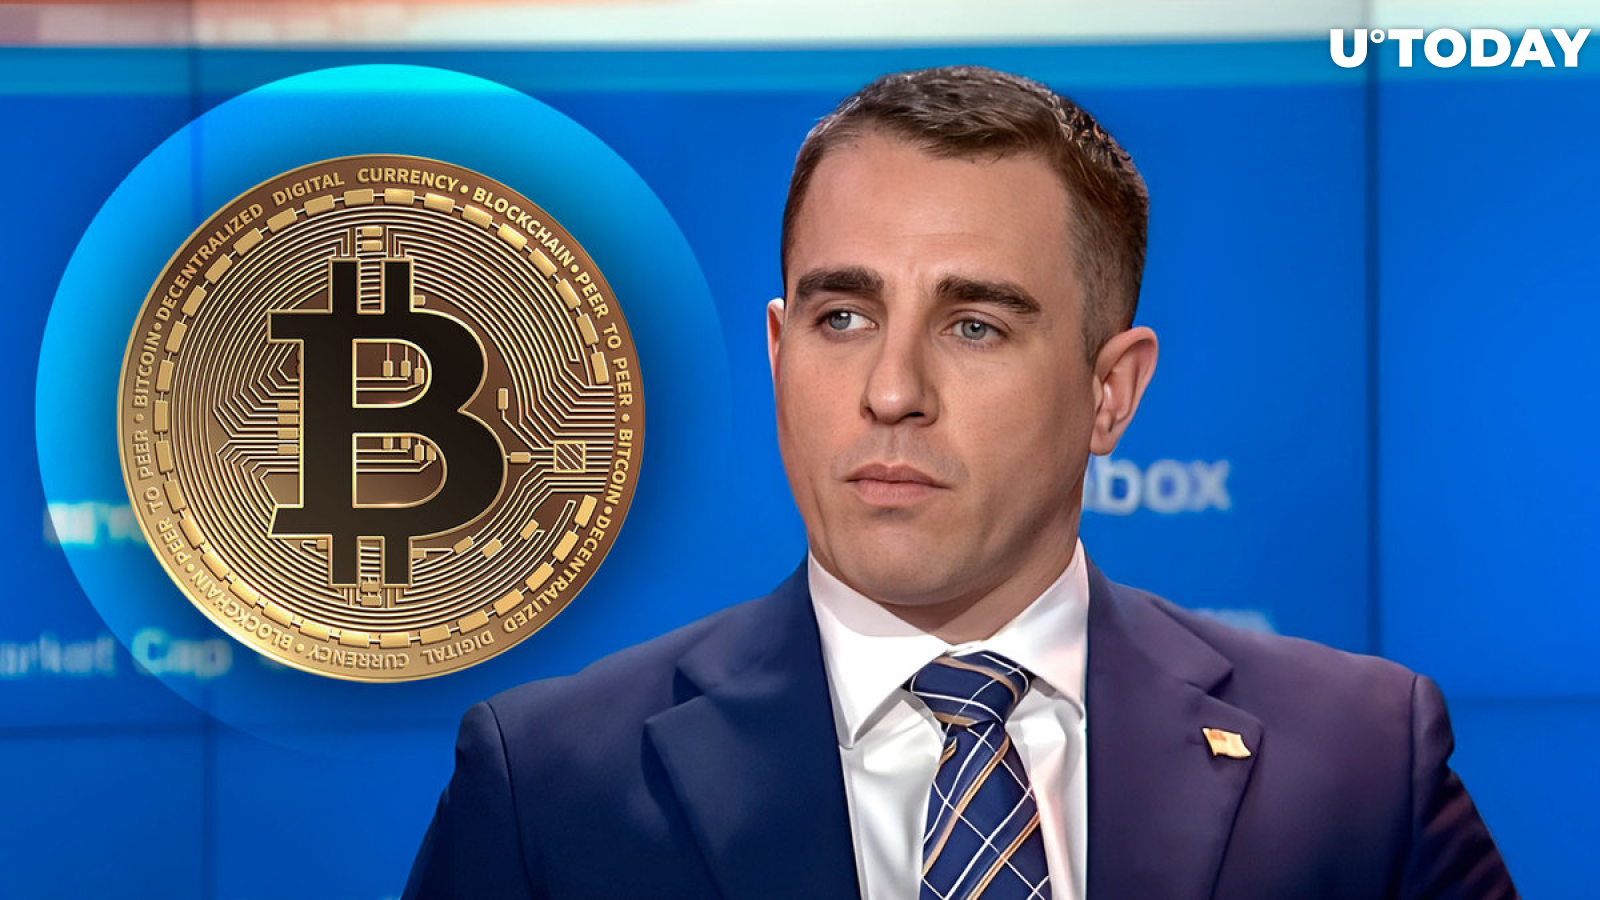 Wild Bitcoin Statement About BTC ETF by Anthony Pompliano Follows BTC Rise Close to $43,000